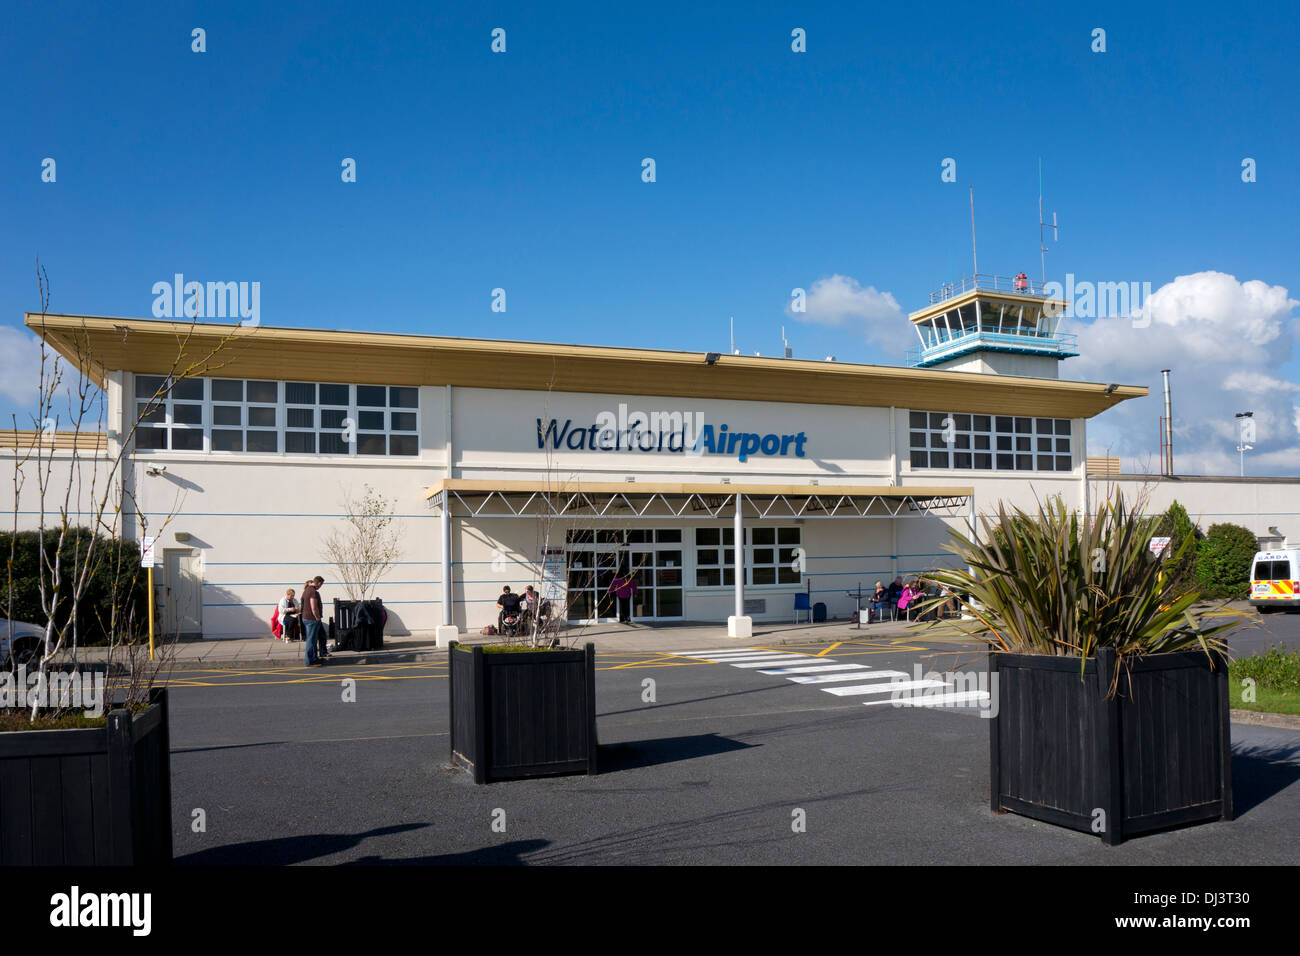 Waterford airport, County Wexford, Ireland Stock Photo